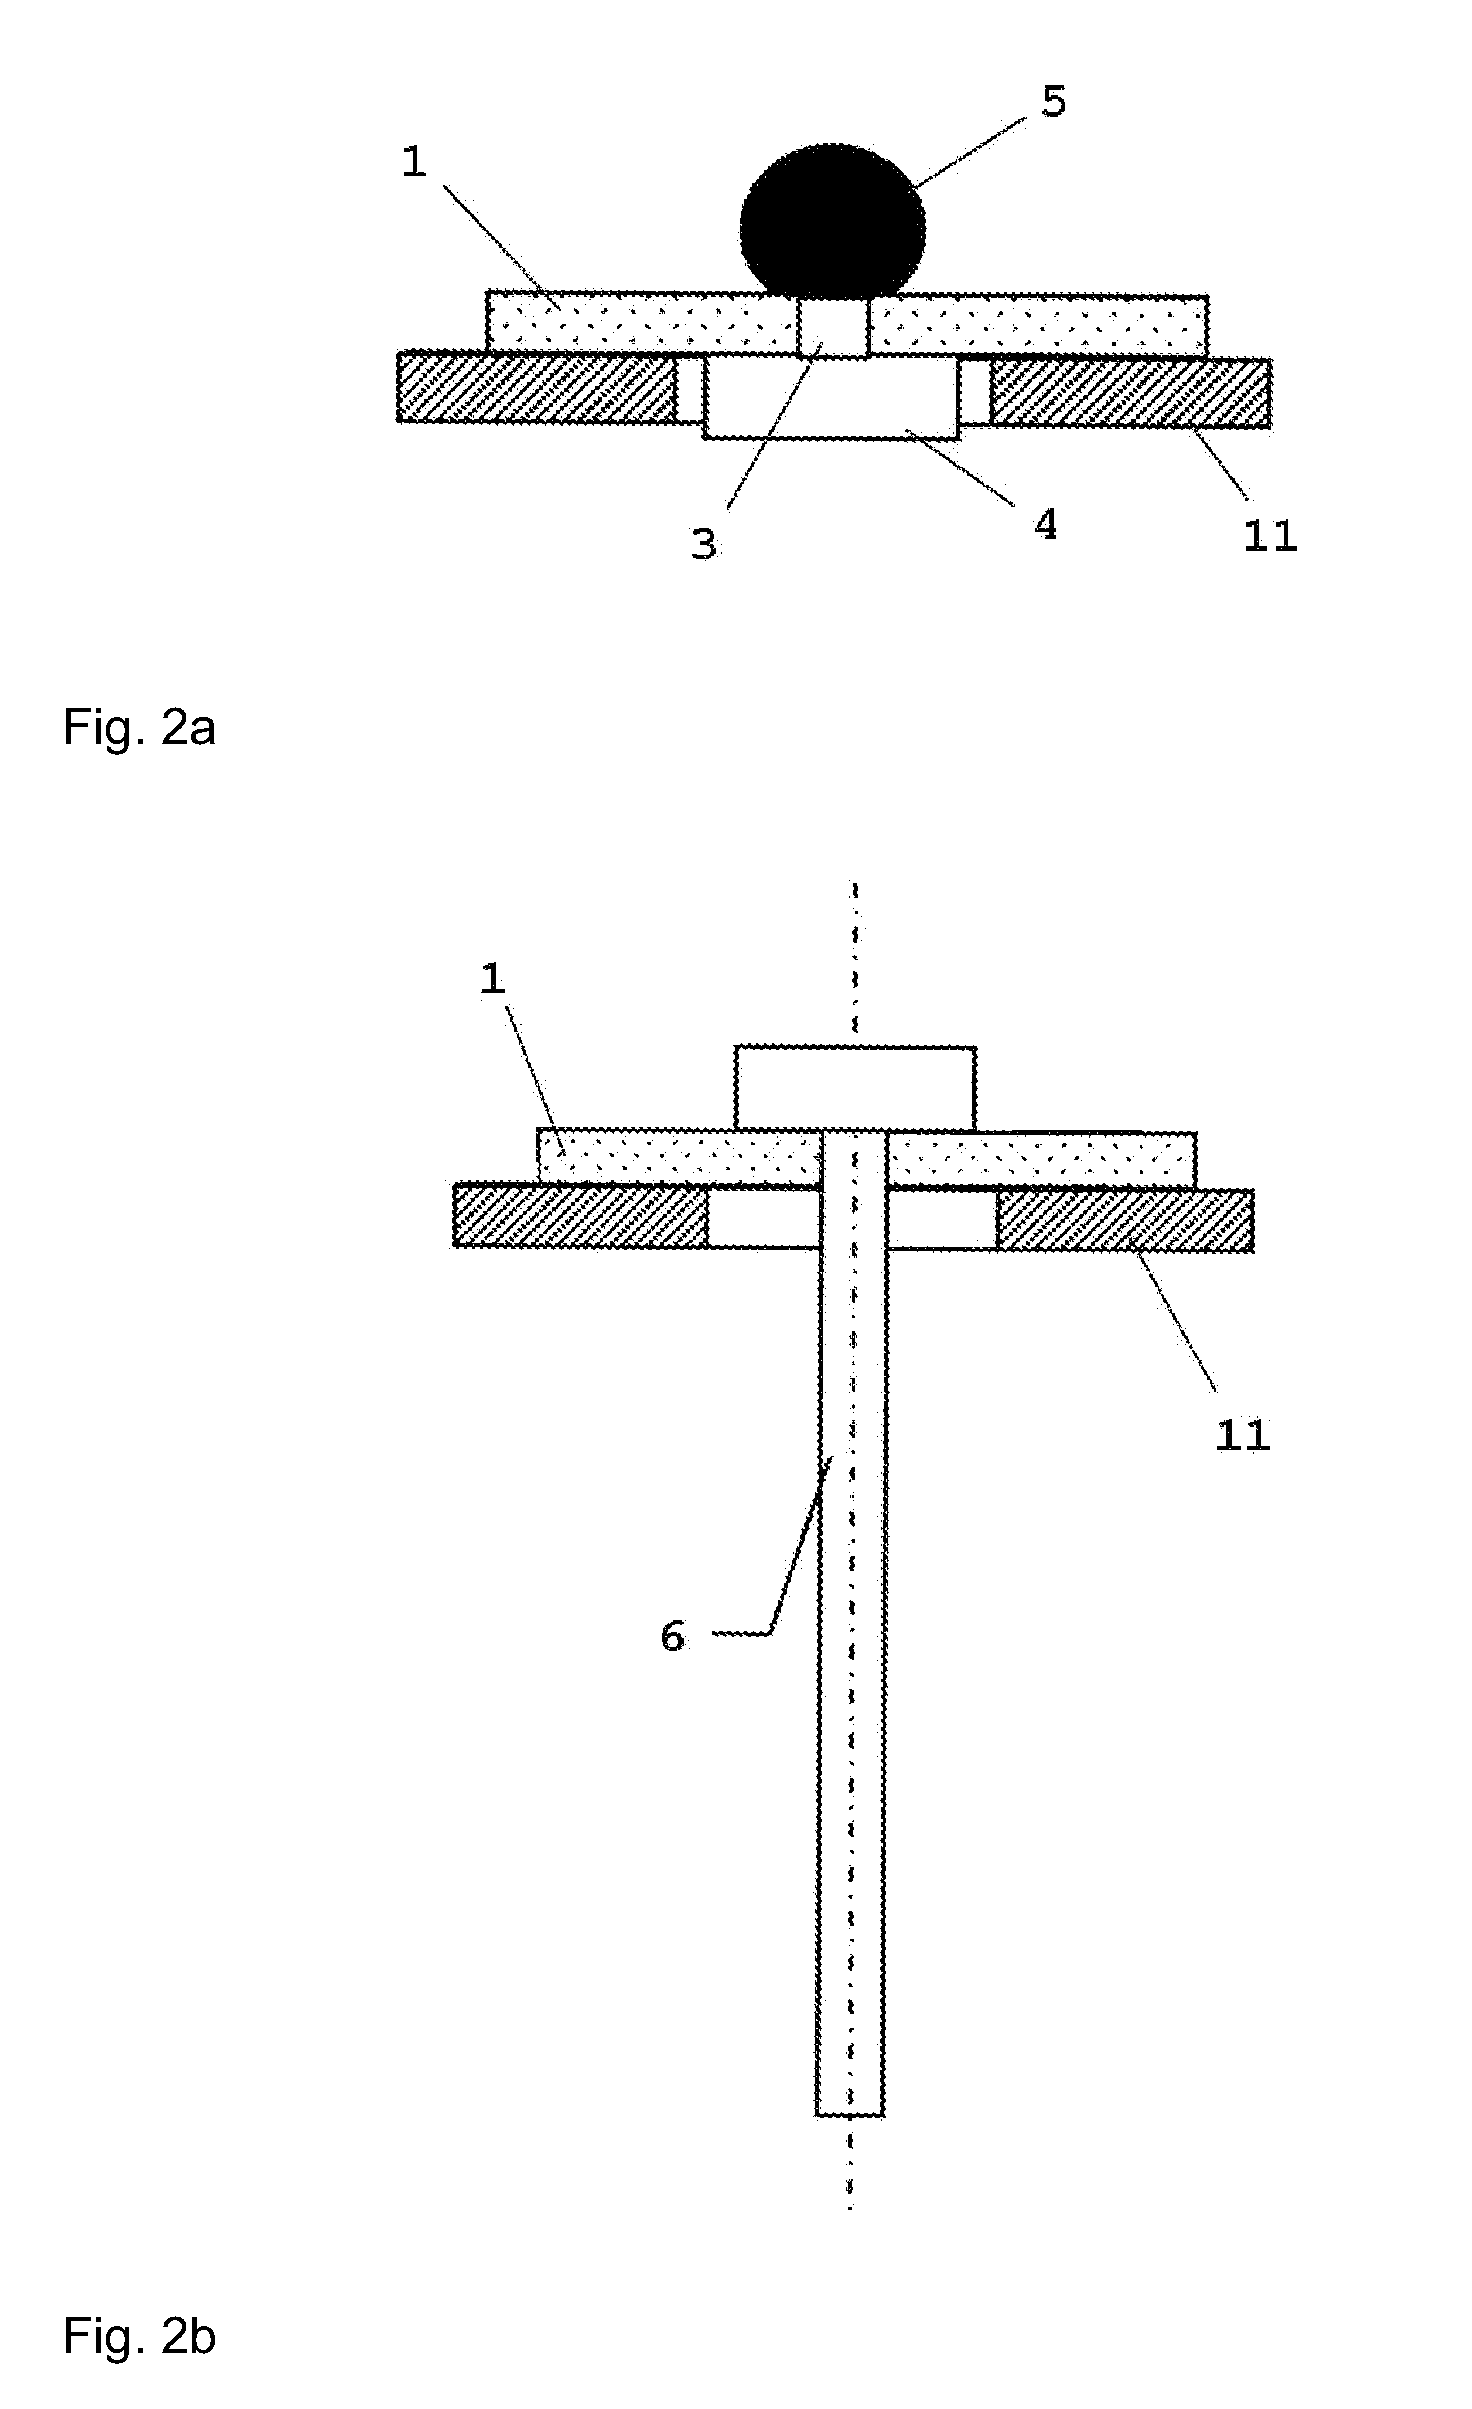 Filter feedthrough for implants